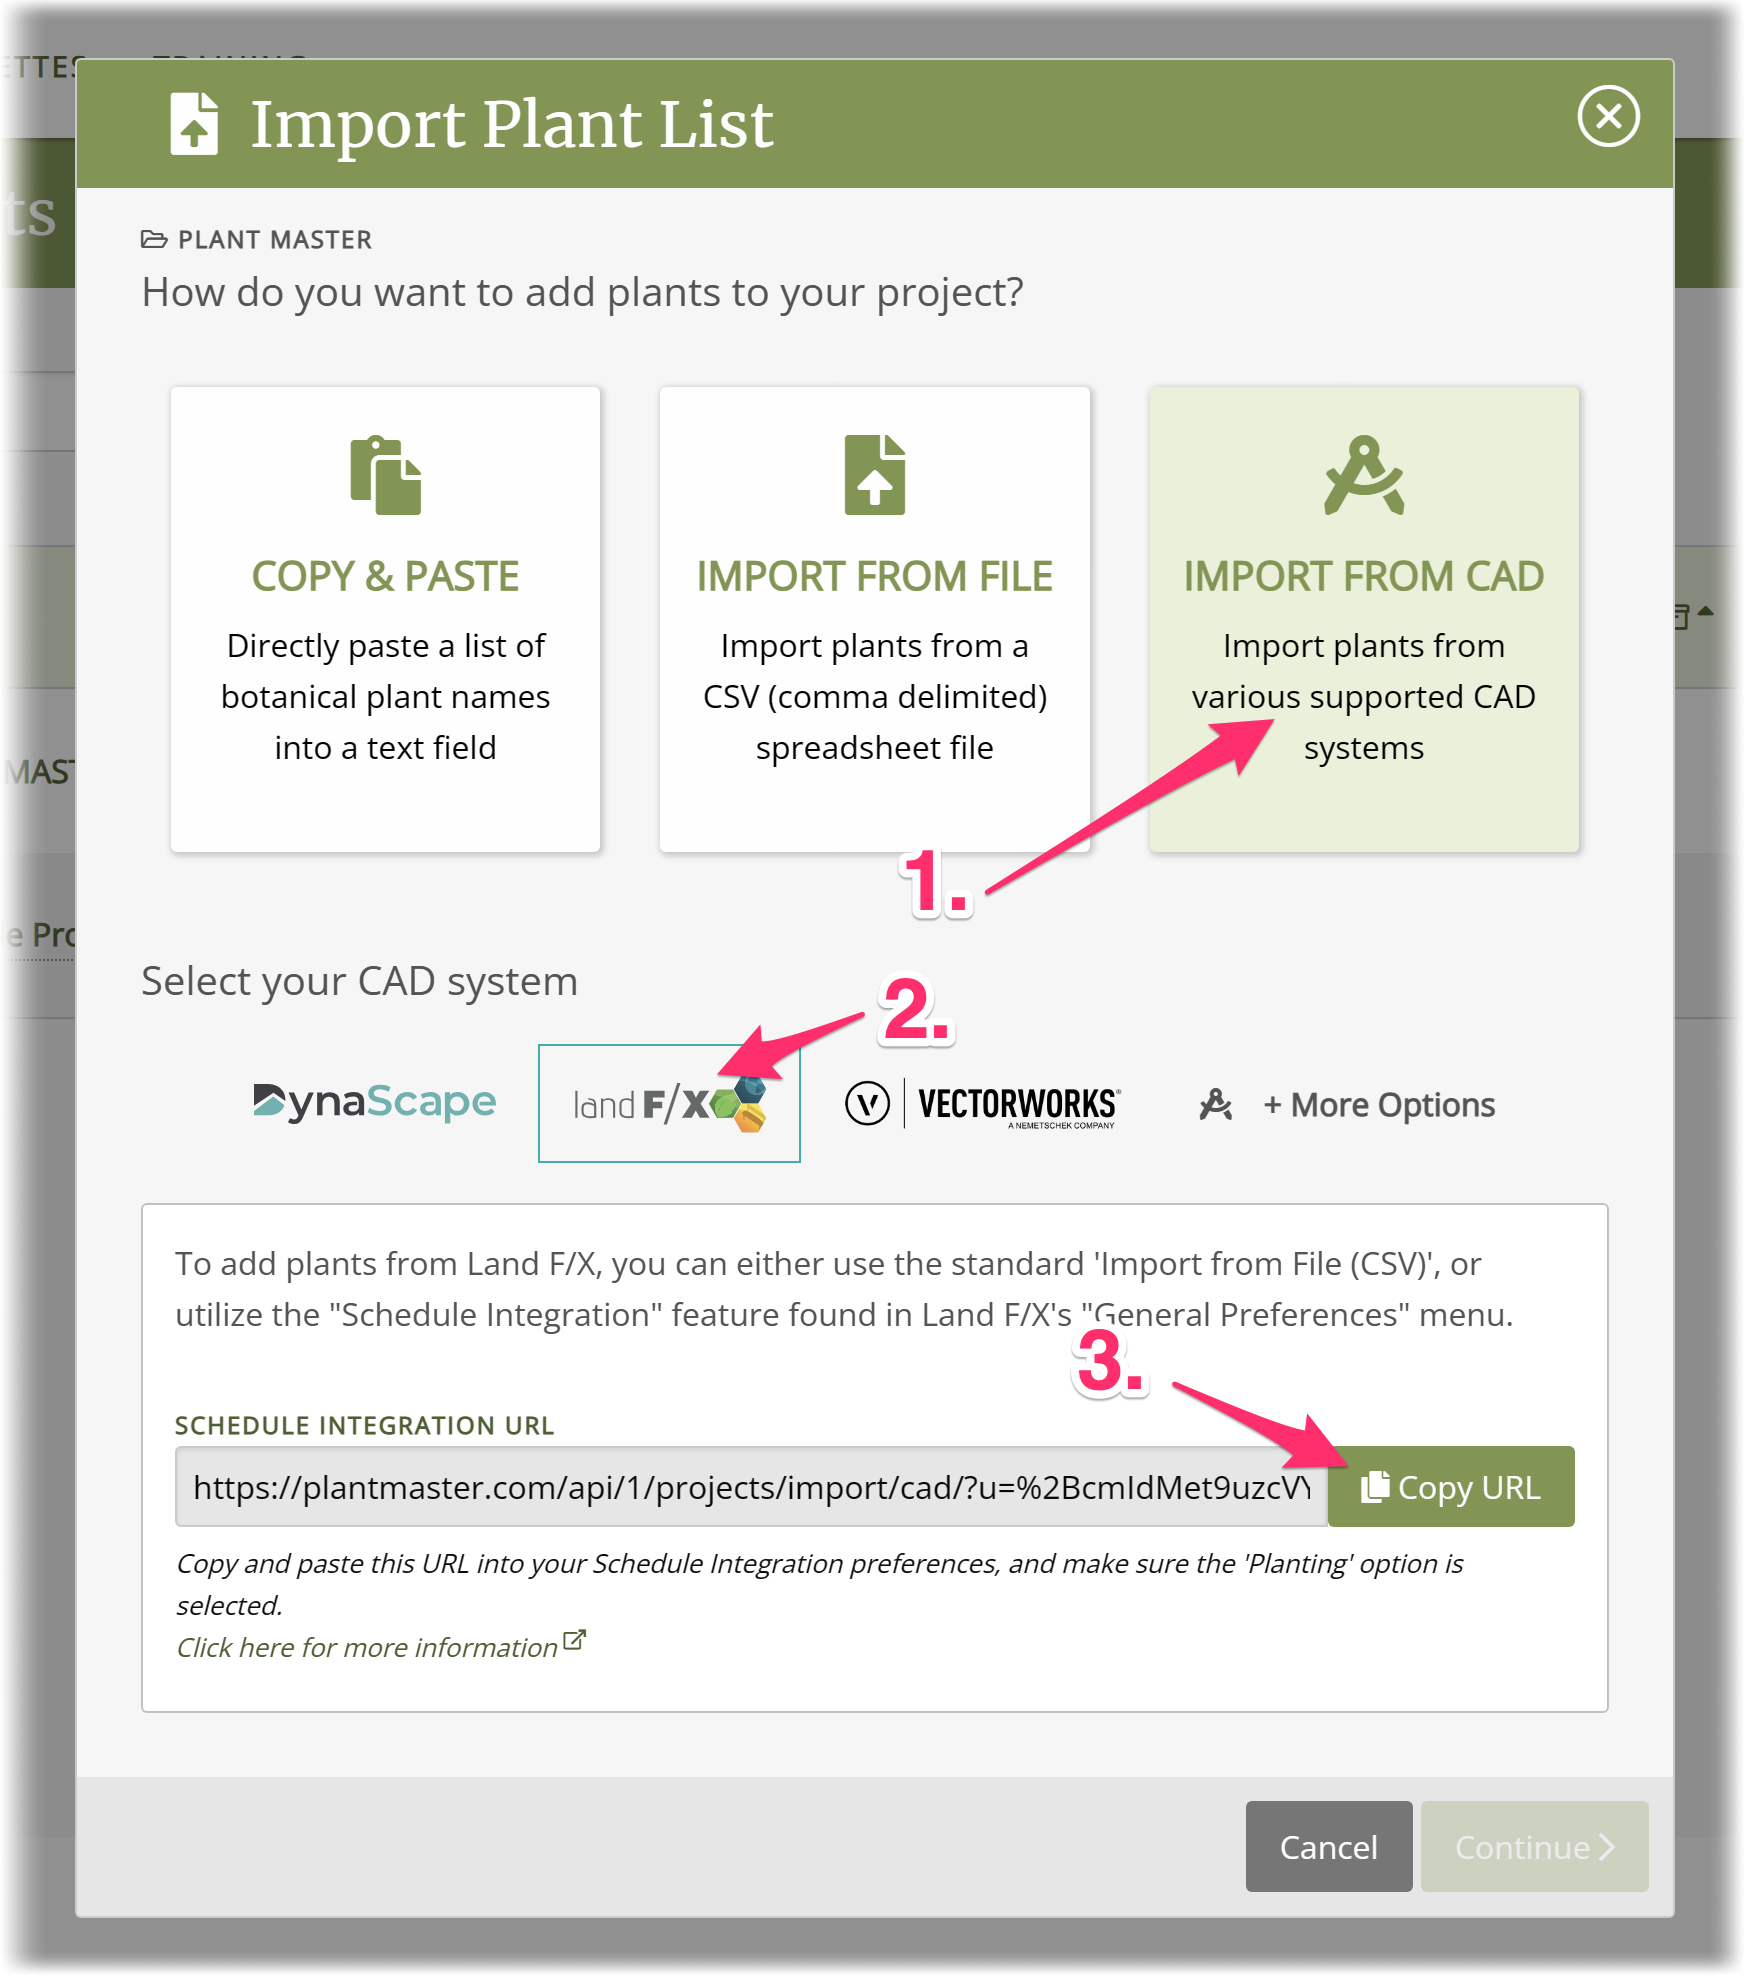 In the Import Plant Listing tool, choose Import from CAD, then select Land F/X to copy your custom URL